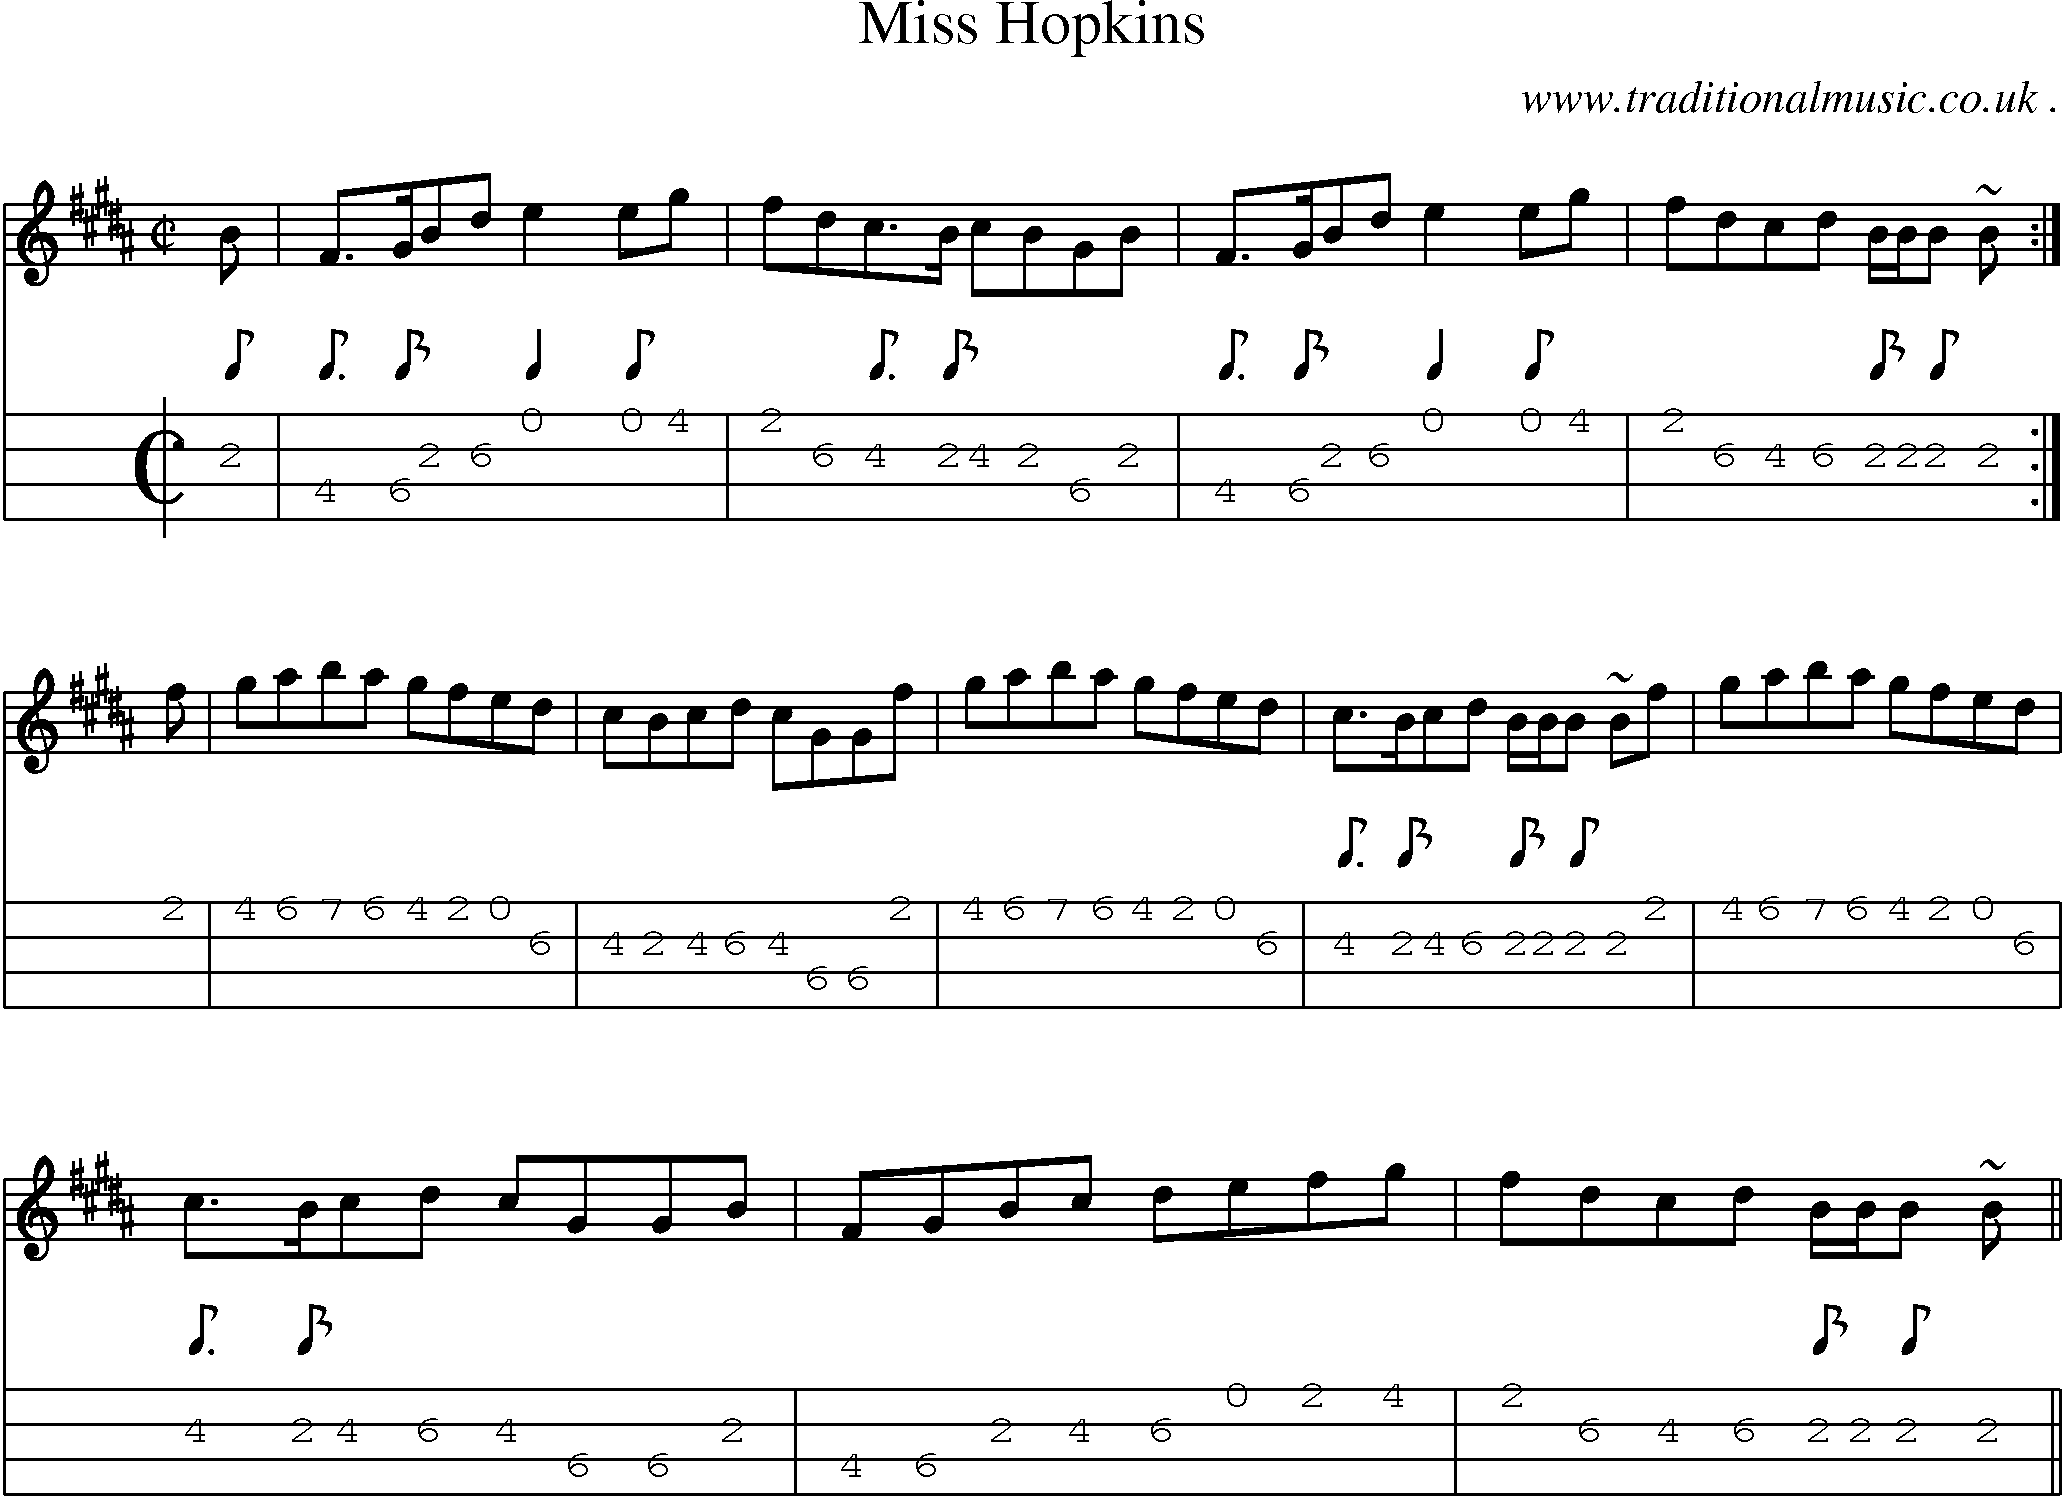 Sheet-music  score, Chords and Mandolin Tabs for Miss Hopkins